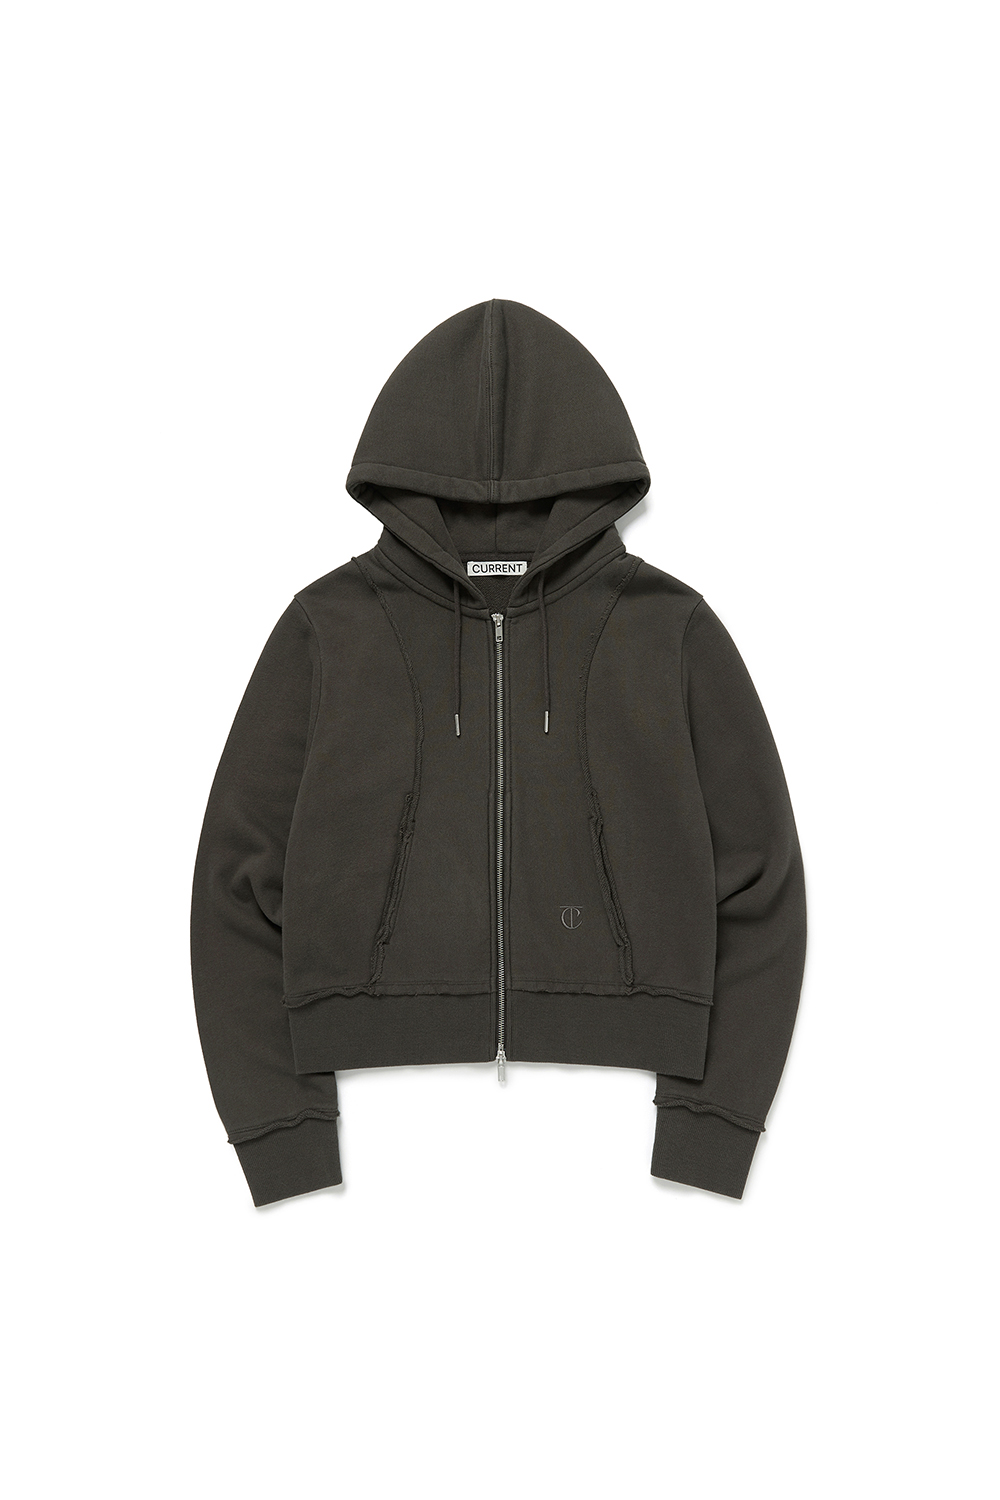 CUT OFF DETAIL HOODED ZIP-UP [CHARCOAL]		